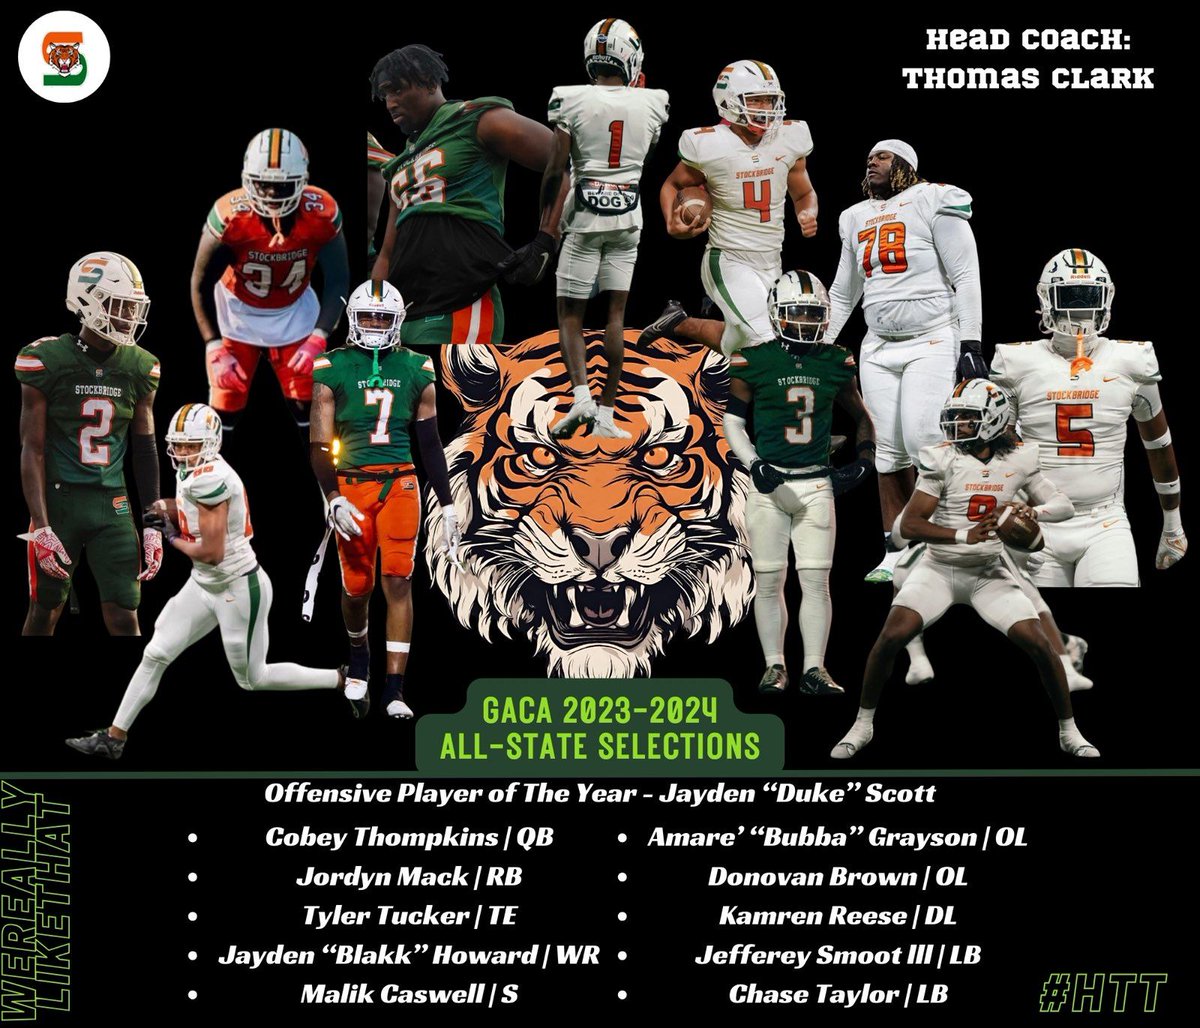 Congrats to our guys that were selected to the 2023 GACA All State Team. We had 11 guys recognized in total this season. This is big for our program at SHS! @coachbyrd6 @DrJamesT @megisaneducator @SHS_HCS @AthleticsHenry @Coach_DJHill @CoachBailey62 @CoachDUBB_ @CoachEverett901